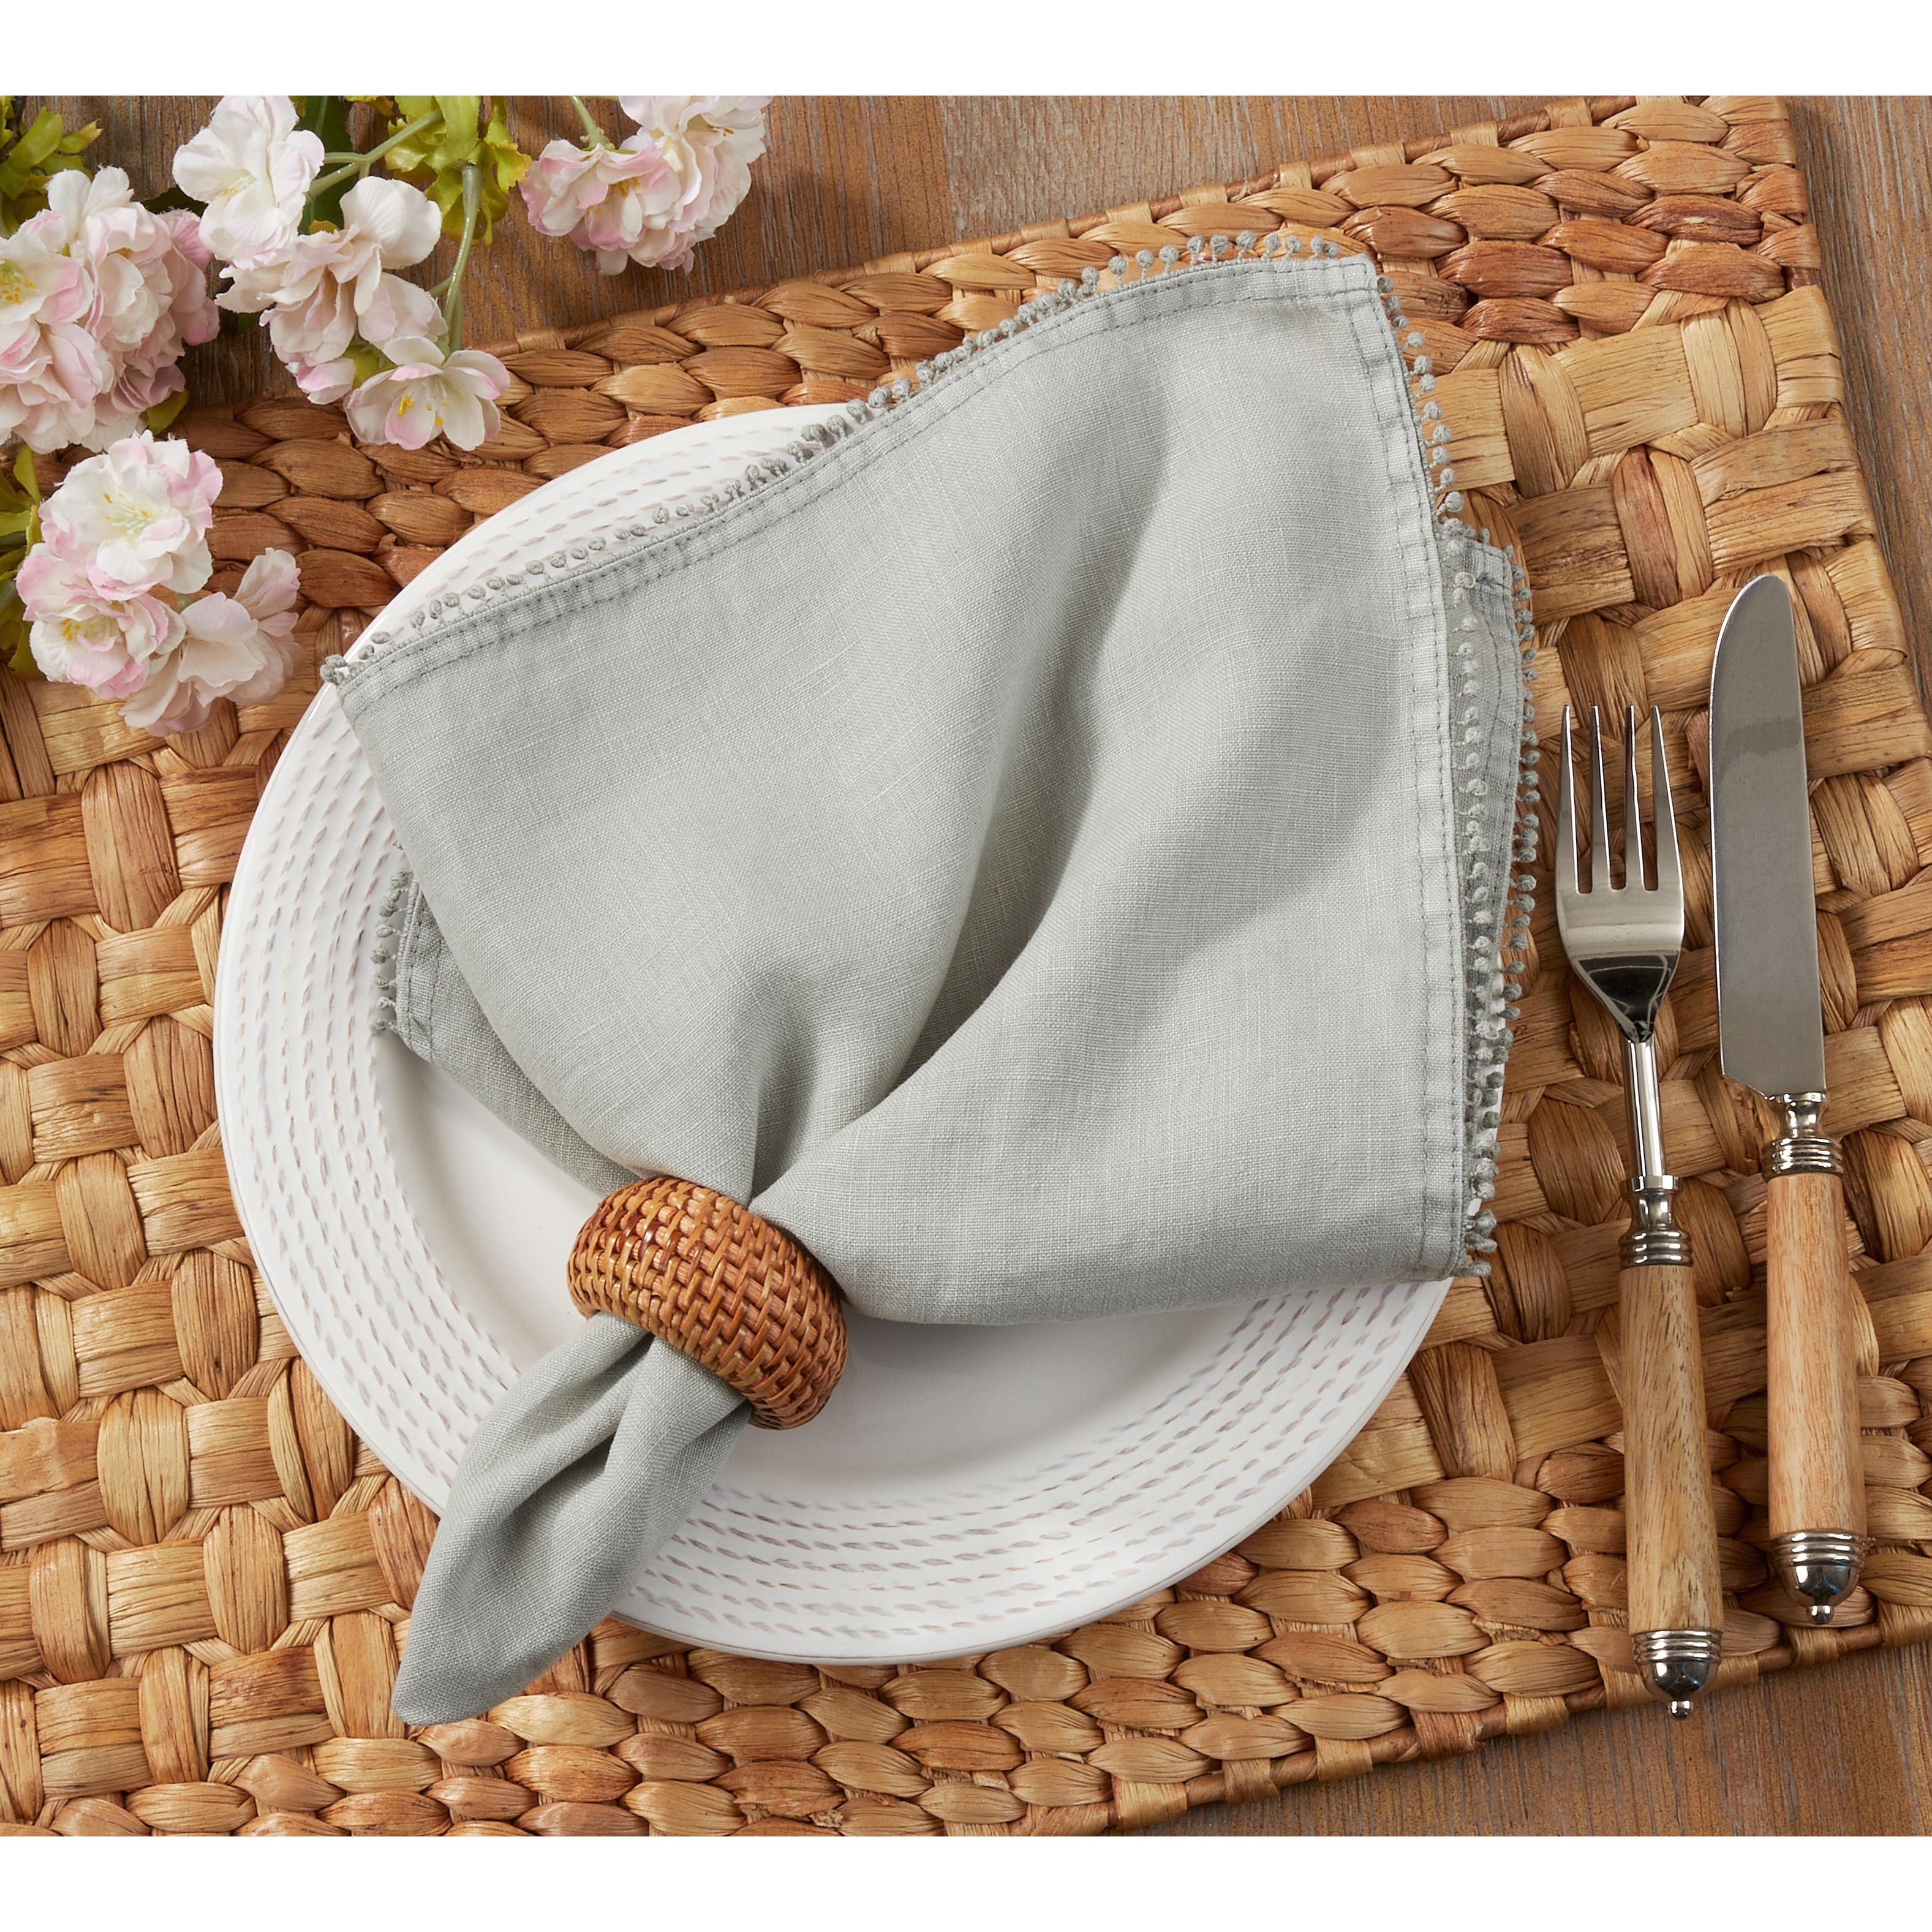 https://ak1.ostkcdn.com/images/products/is/images/direct/0166102d02a967f0375ef46aac26811c6e72962d/Pompom-Design-Table-Napkins-With-100%25-Linen-%28Set-of-4%29.jpg